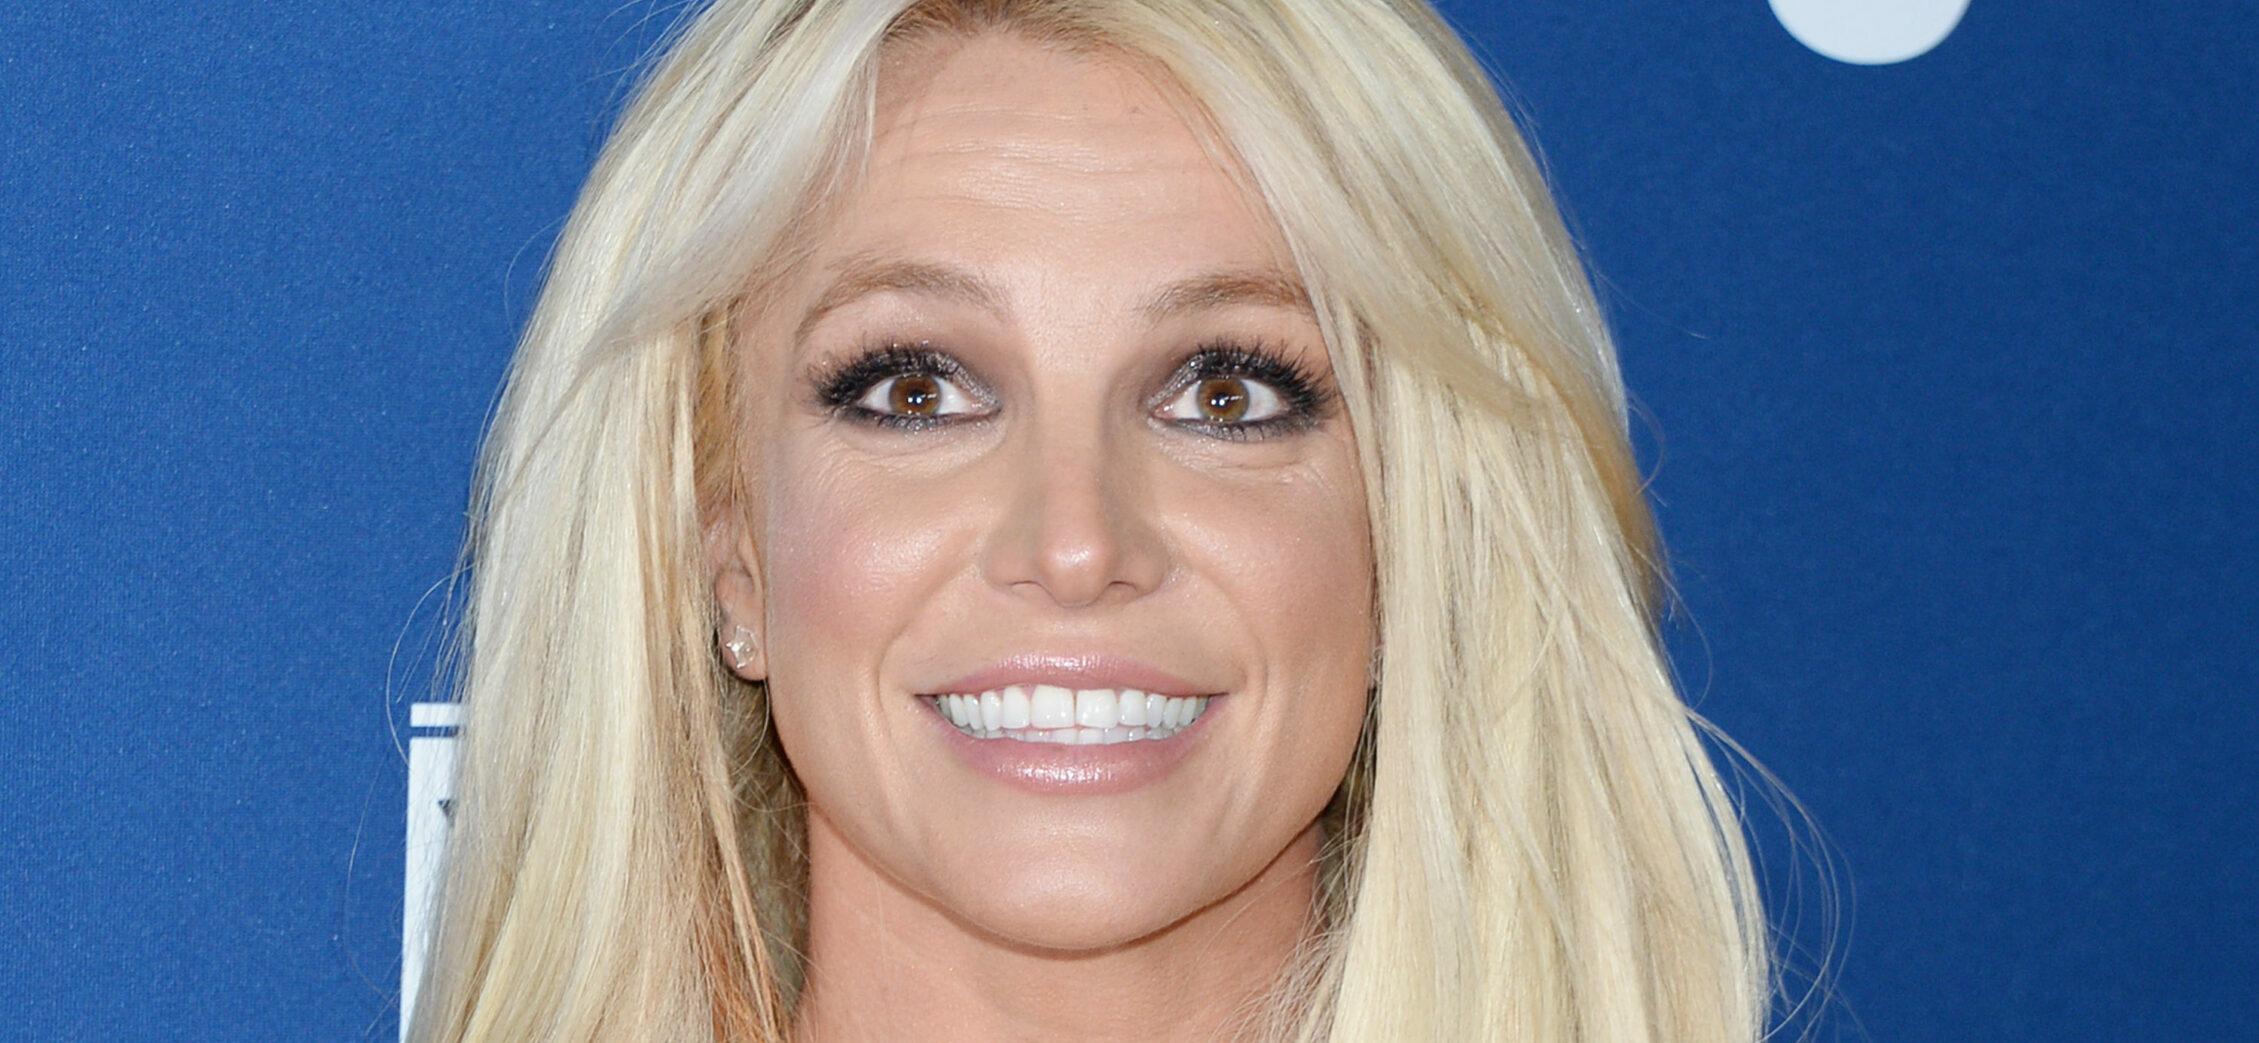 Britney Spears Says 2021 ‘Tried Its Hardest,’ Has Uplifting Message For Fans